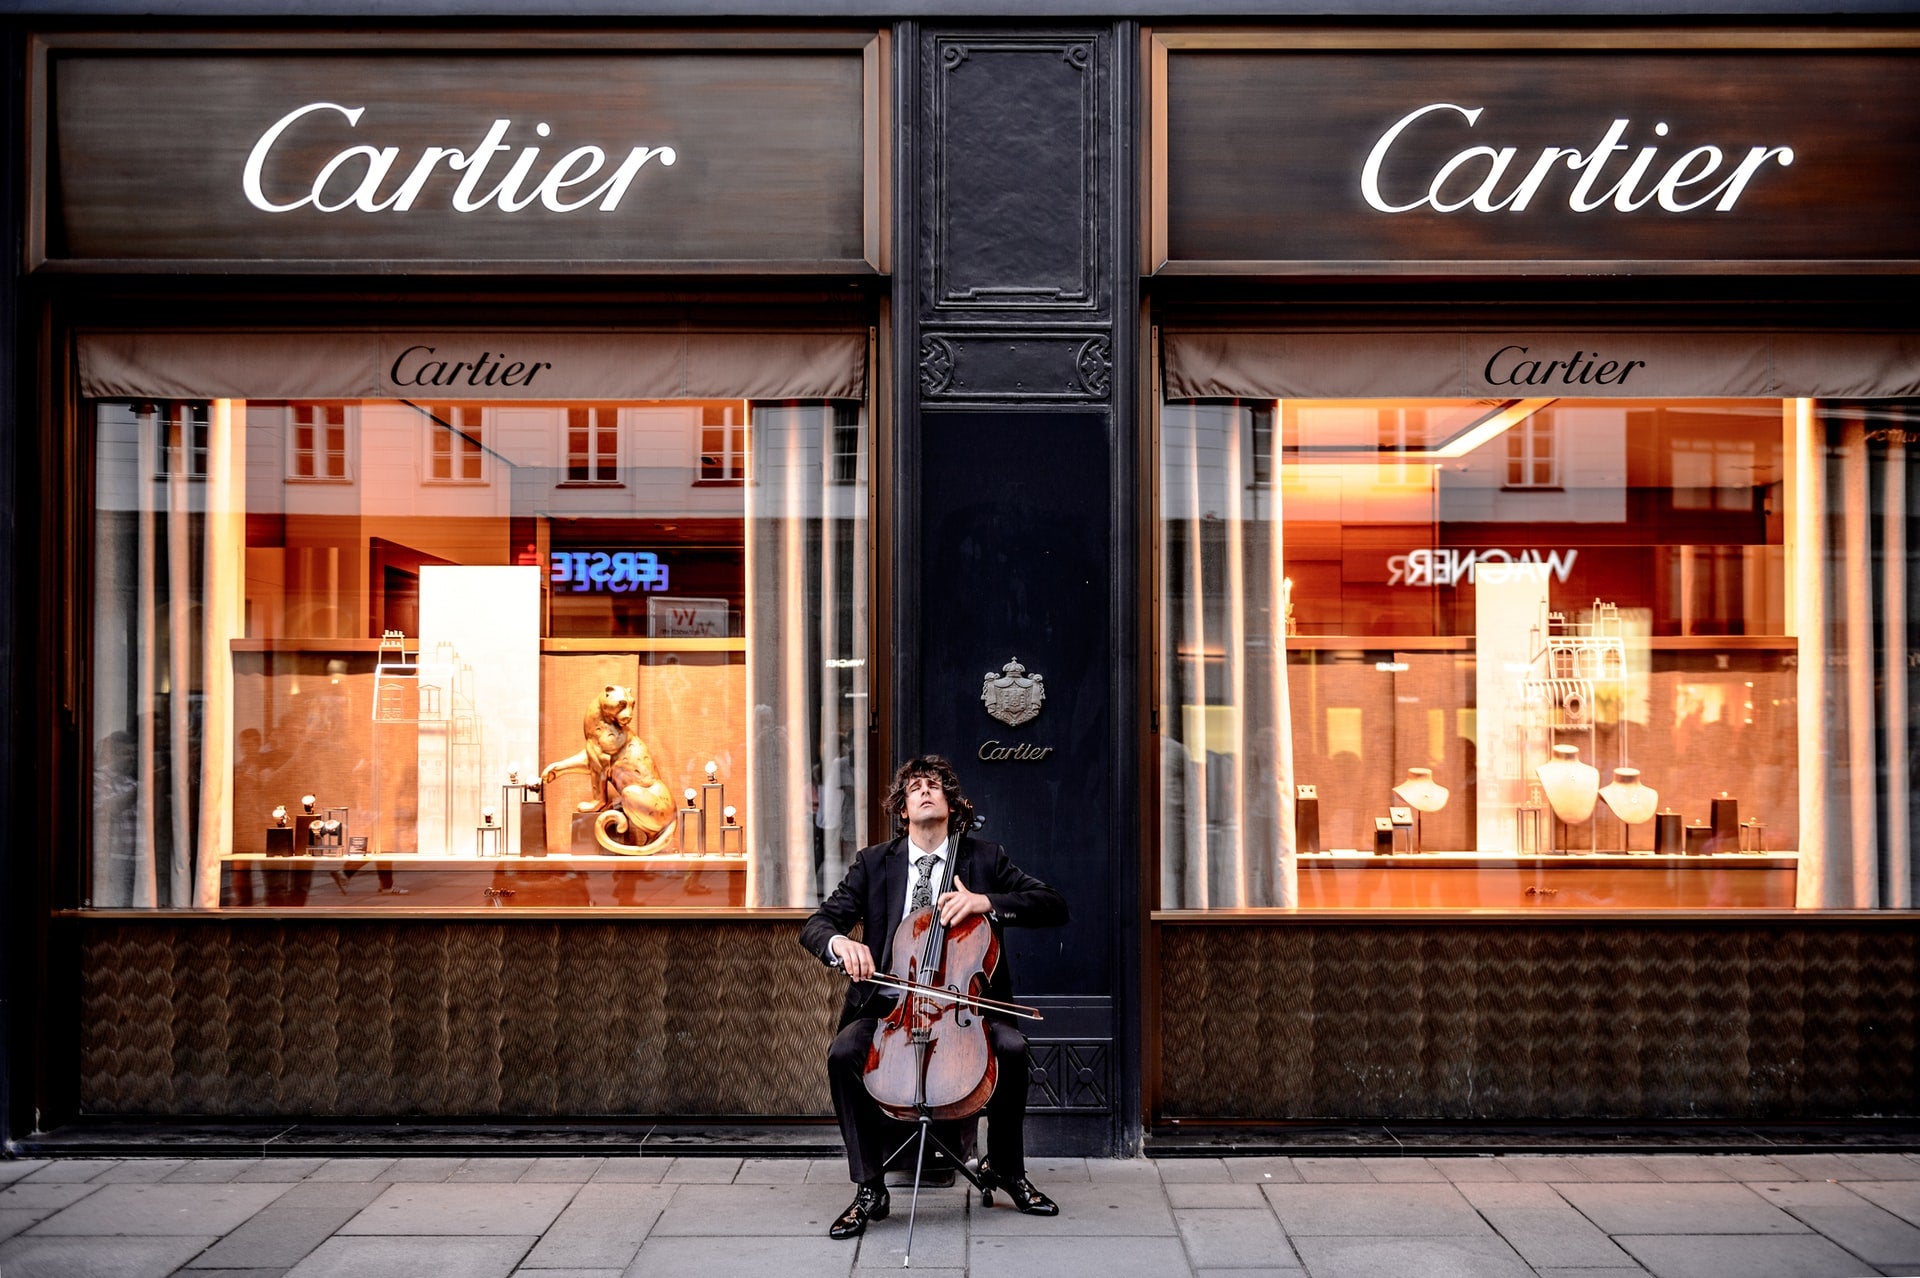 Amazon and Cartier file lawsuits over counterfeit jewellery